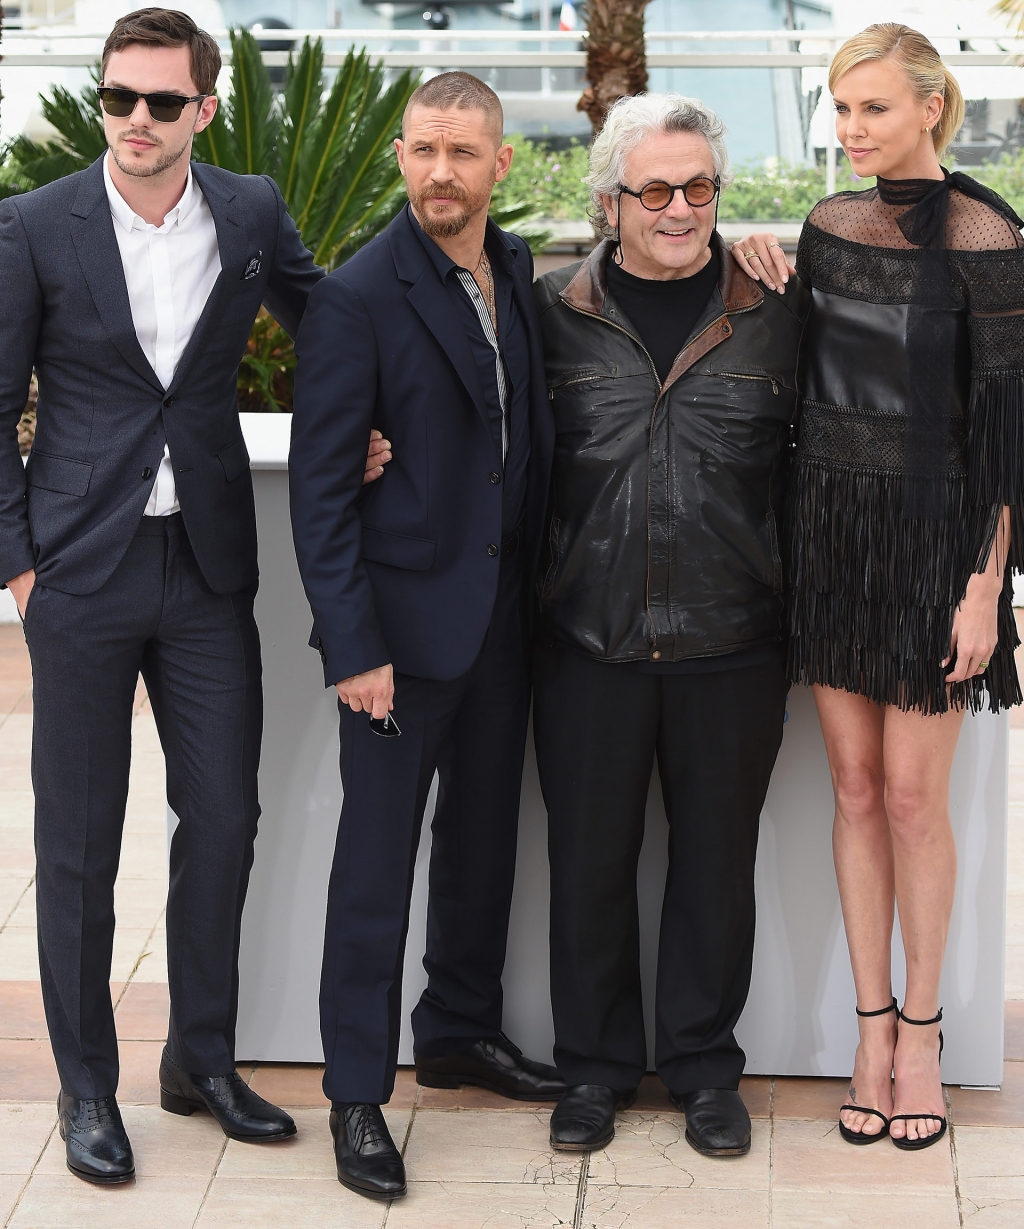 Aussie triumph! Director George Miller's *Mad Max Fury Road* was filmed in Australia and stars Nicholas Hoult Tom Hardy and Charlize Theron